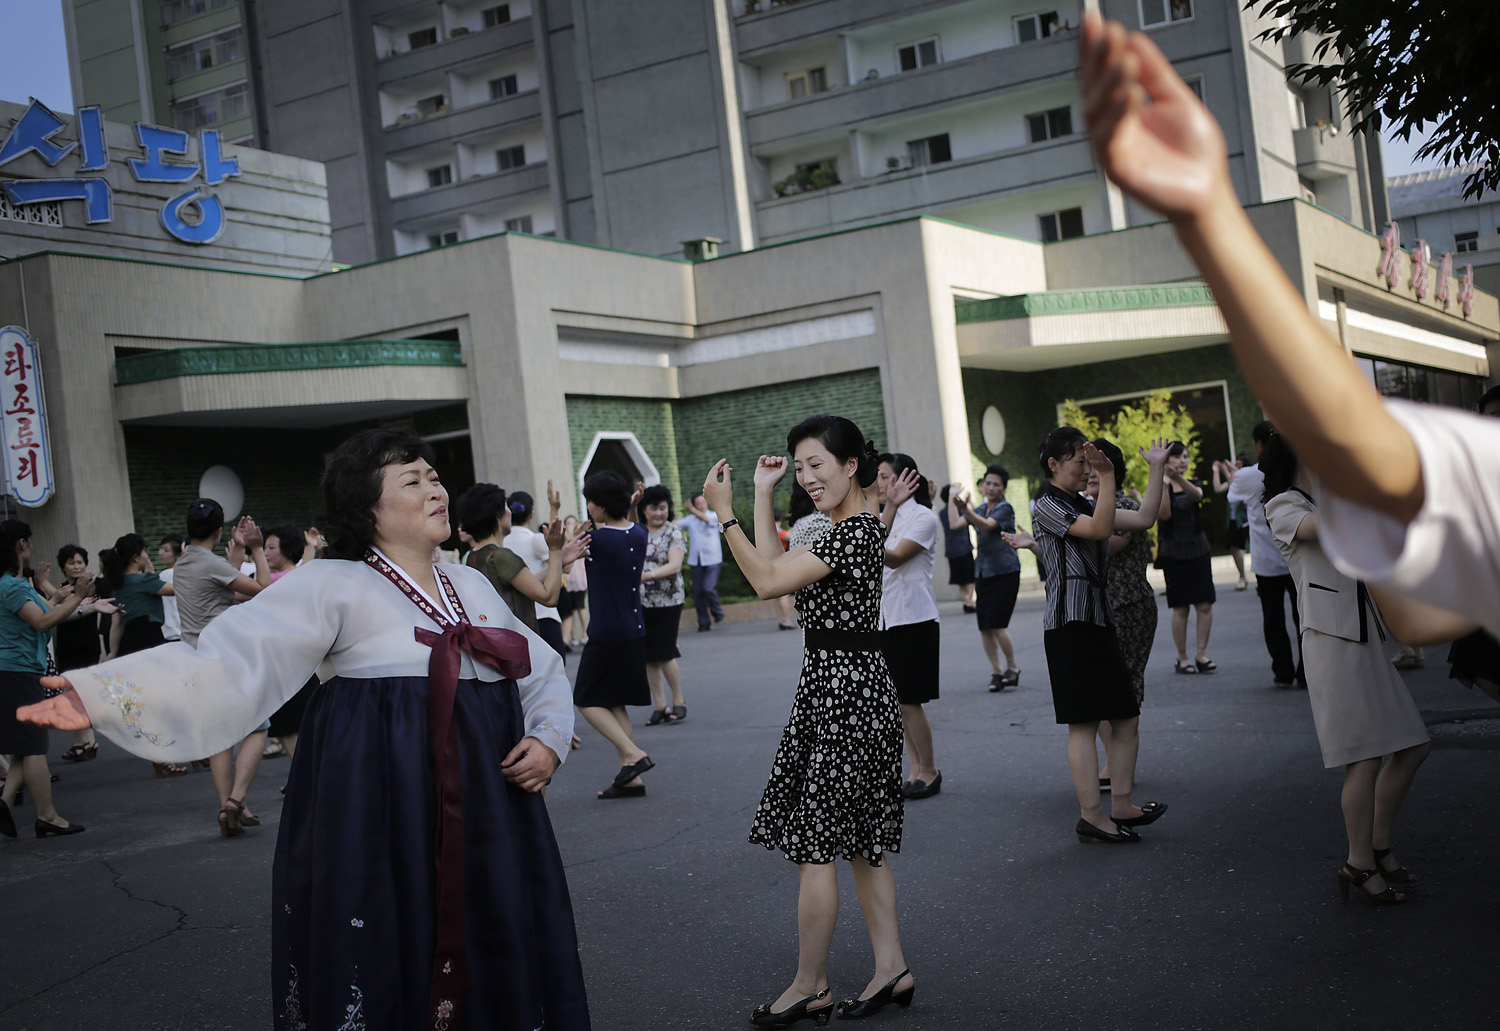 North Koreans  dance in downtown Pyongyang, Sunday, July 27, 2014 in North Korea.